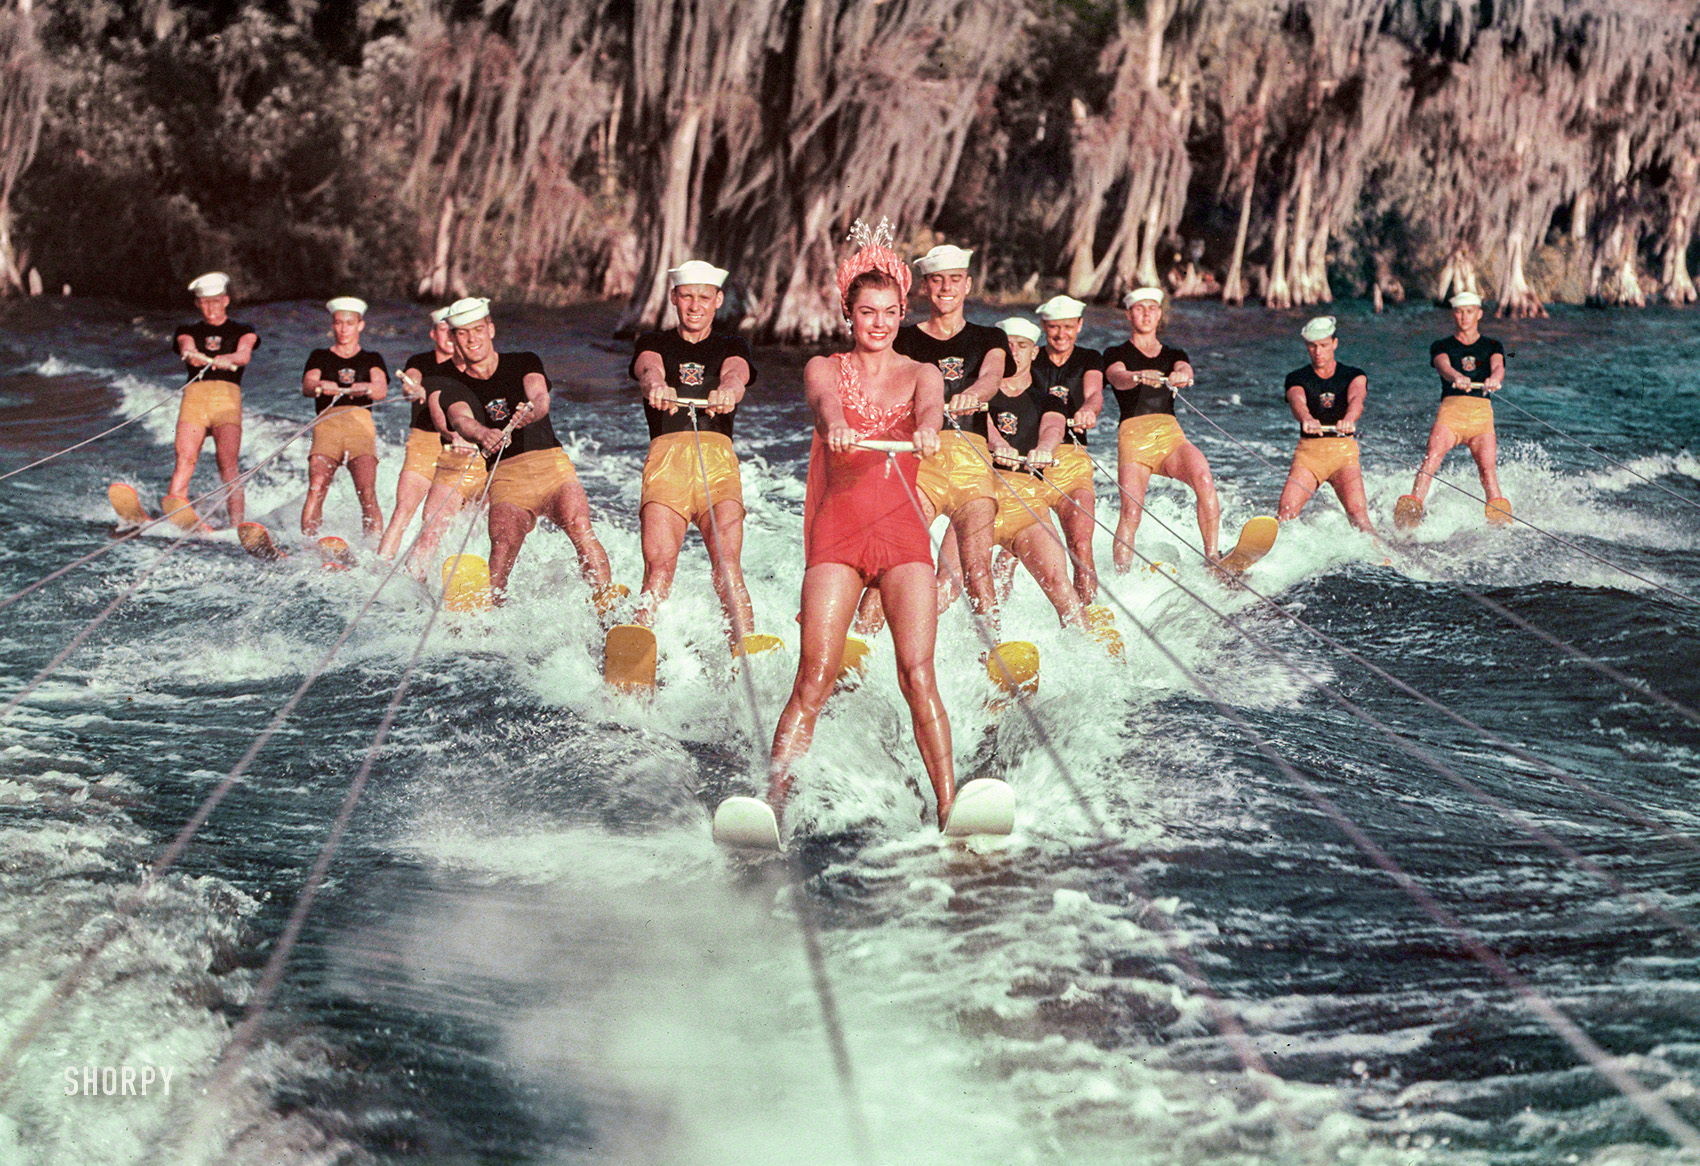 February 1953. "Actress Esther Williams and cast of the film Easy to Love rehearsing and filming water skiing sequences at Cypress Gardens, Winter Haven, Florida." Ektachrome transparency by Phillip Harrington for the Look magazine assignment "Esther Williams: Mermaid on Skis." View full size.